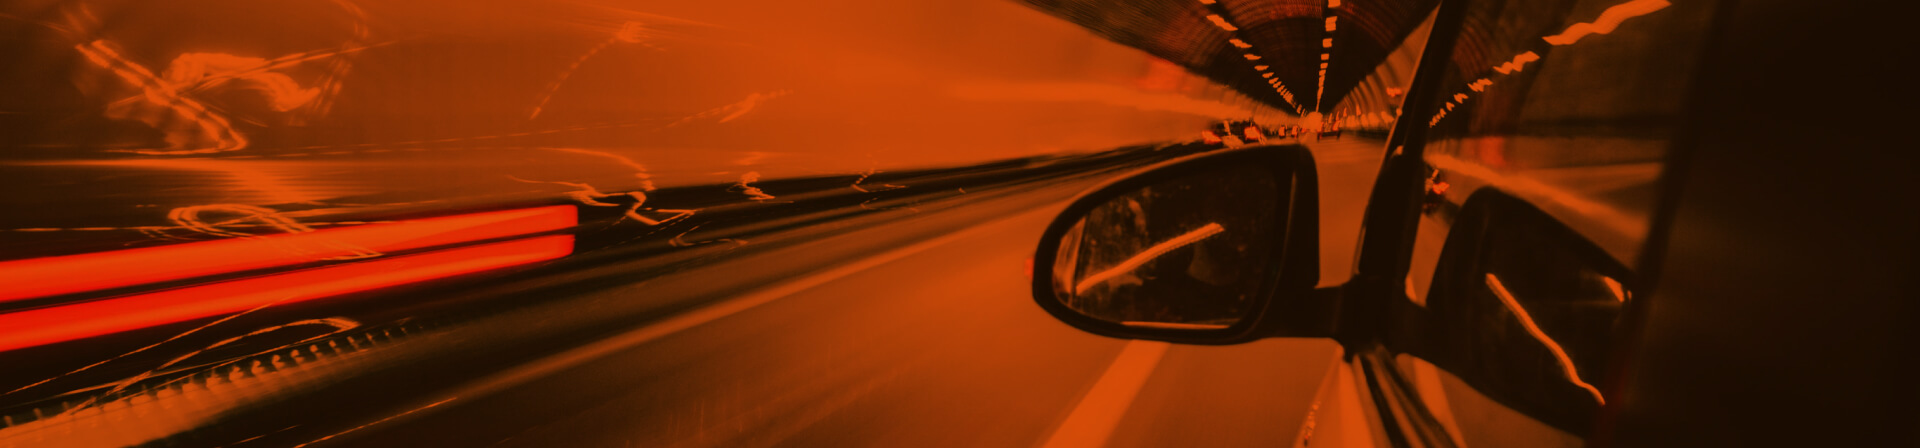 car driving on road window look on rear view mirror